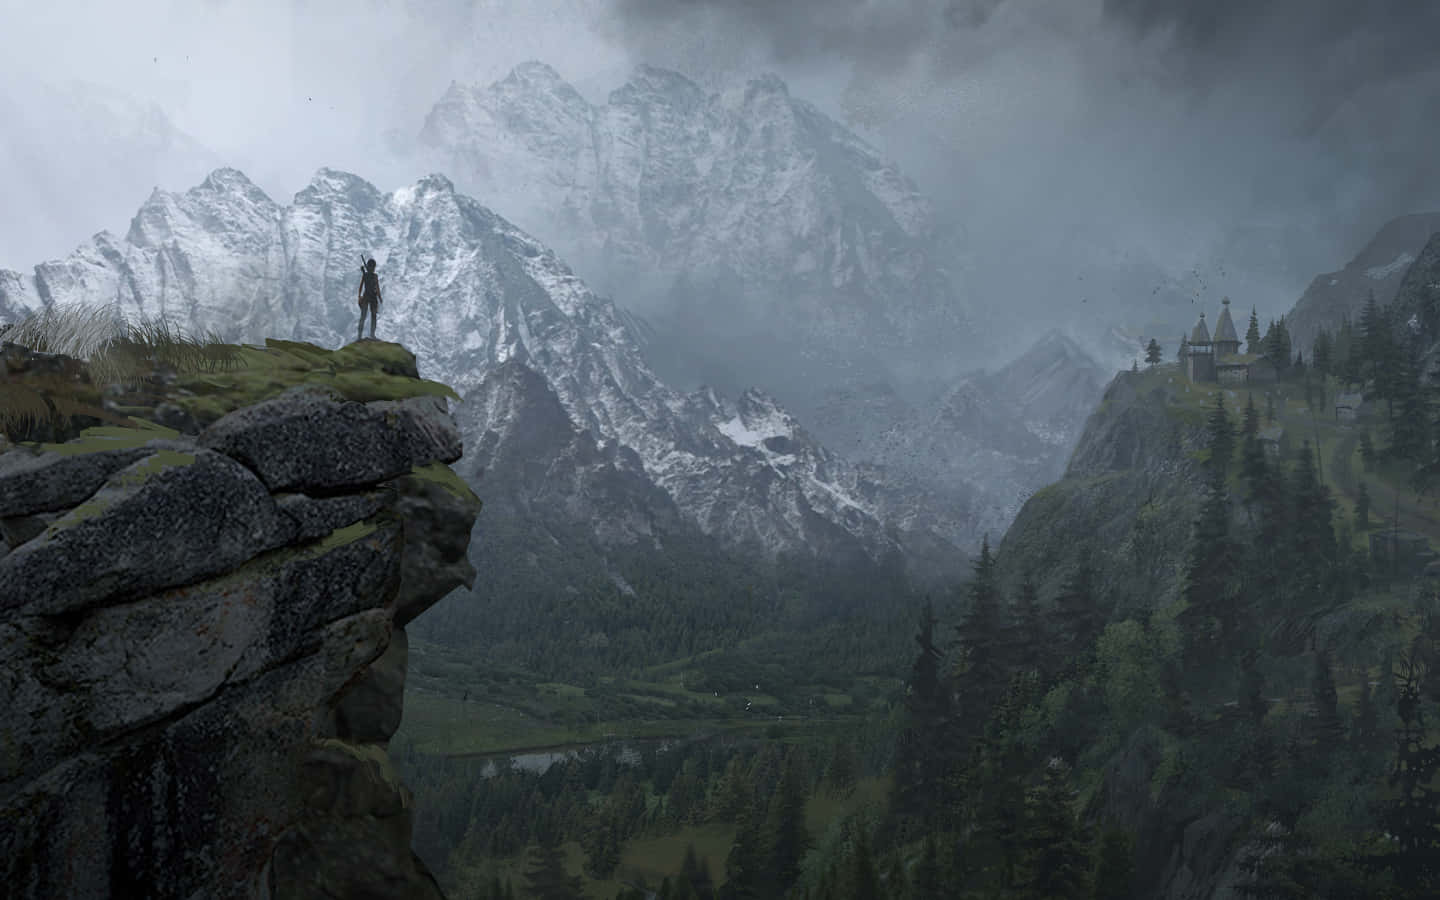 Rise of the Tomb Raider: Survive in the harshest elements